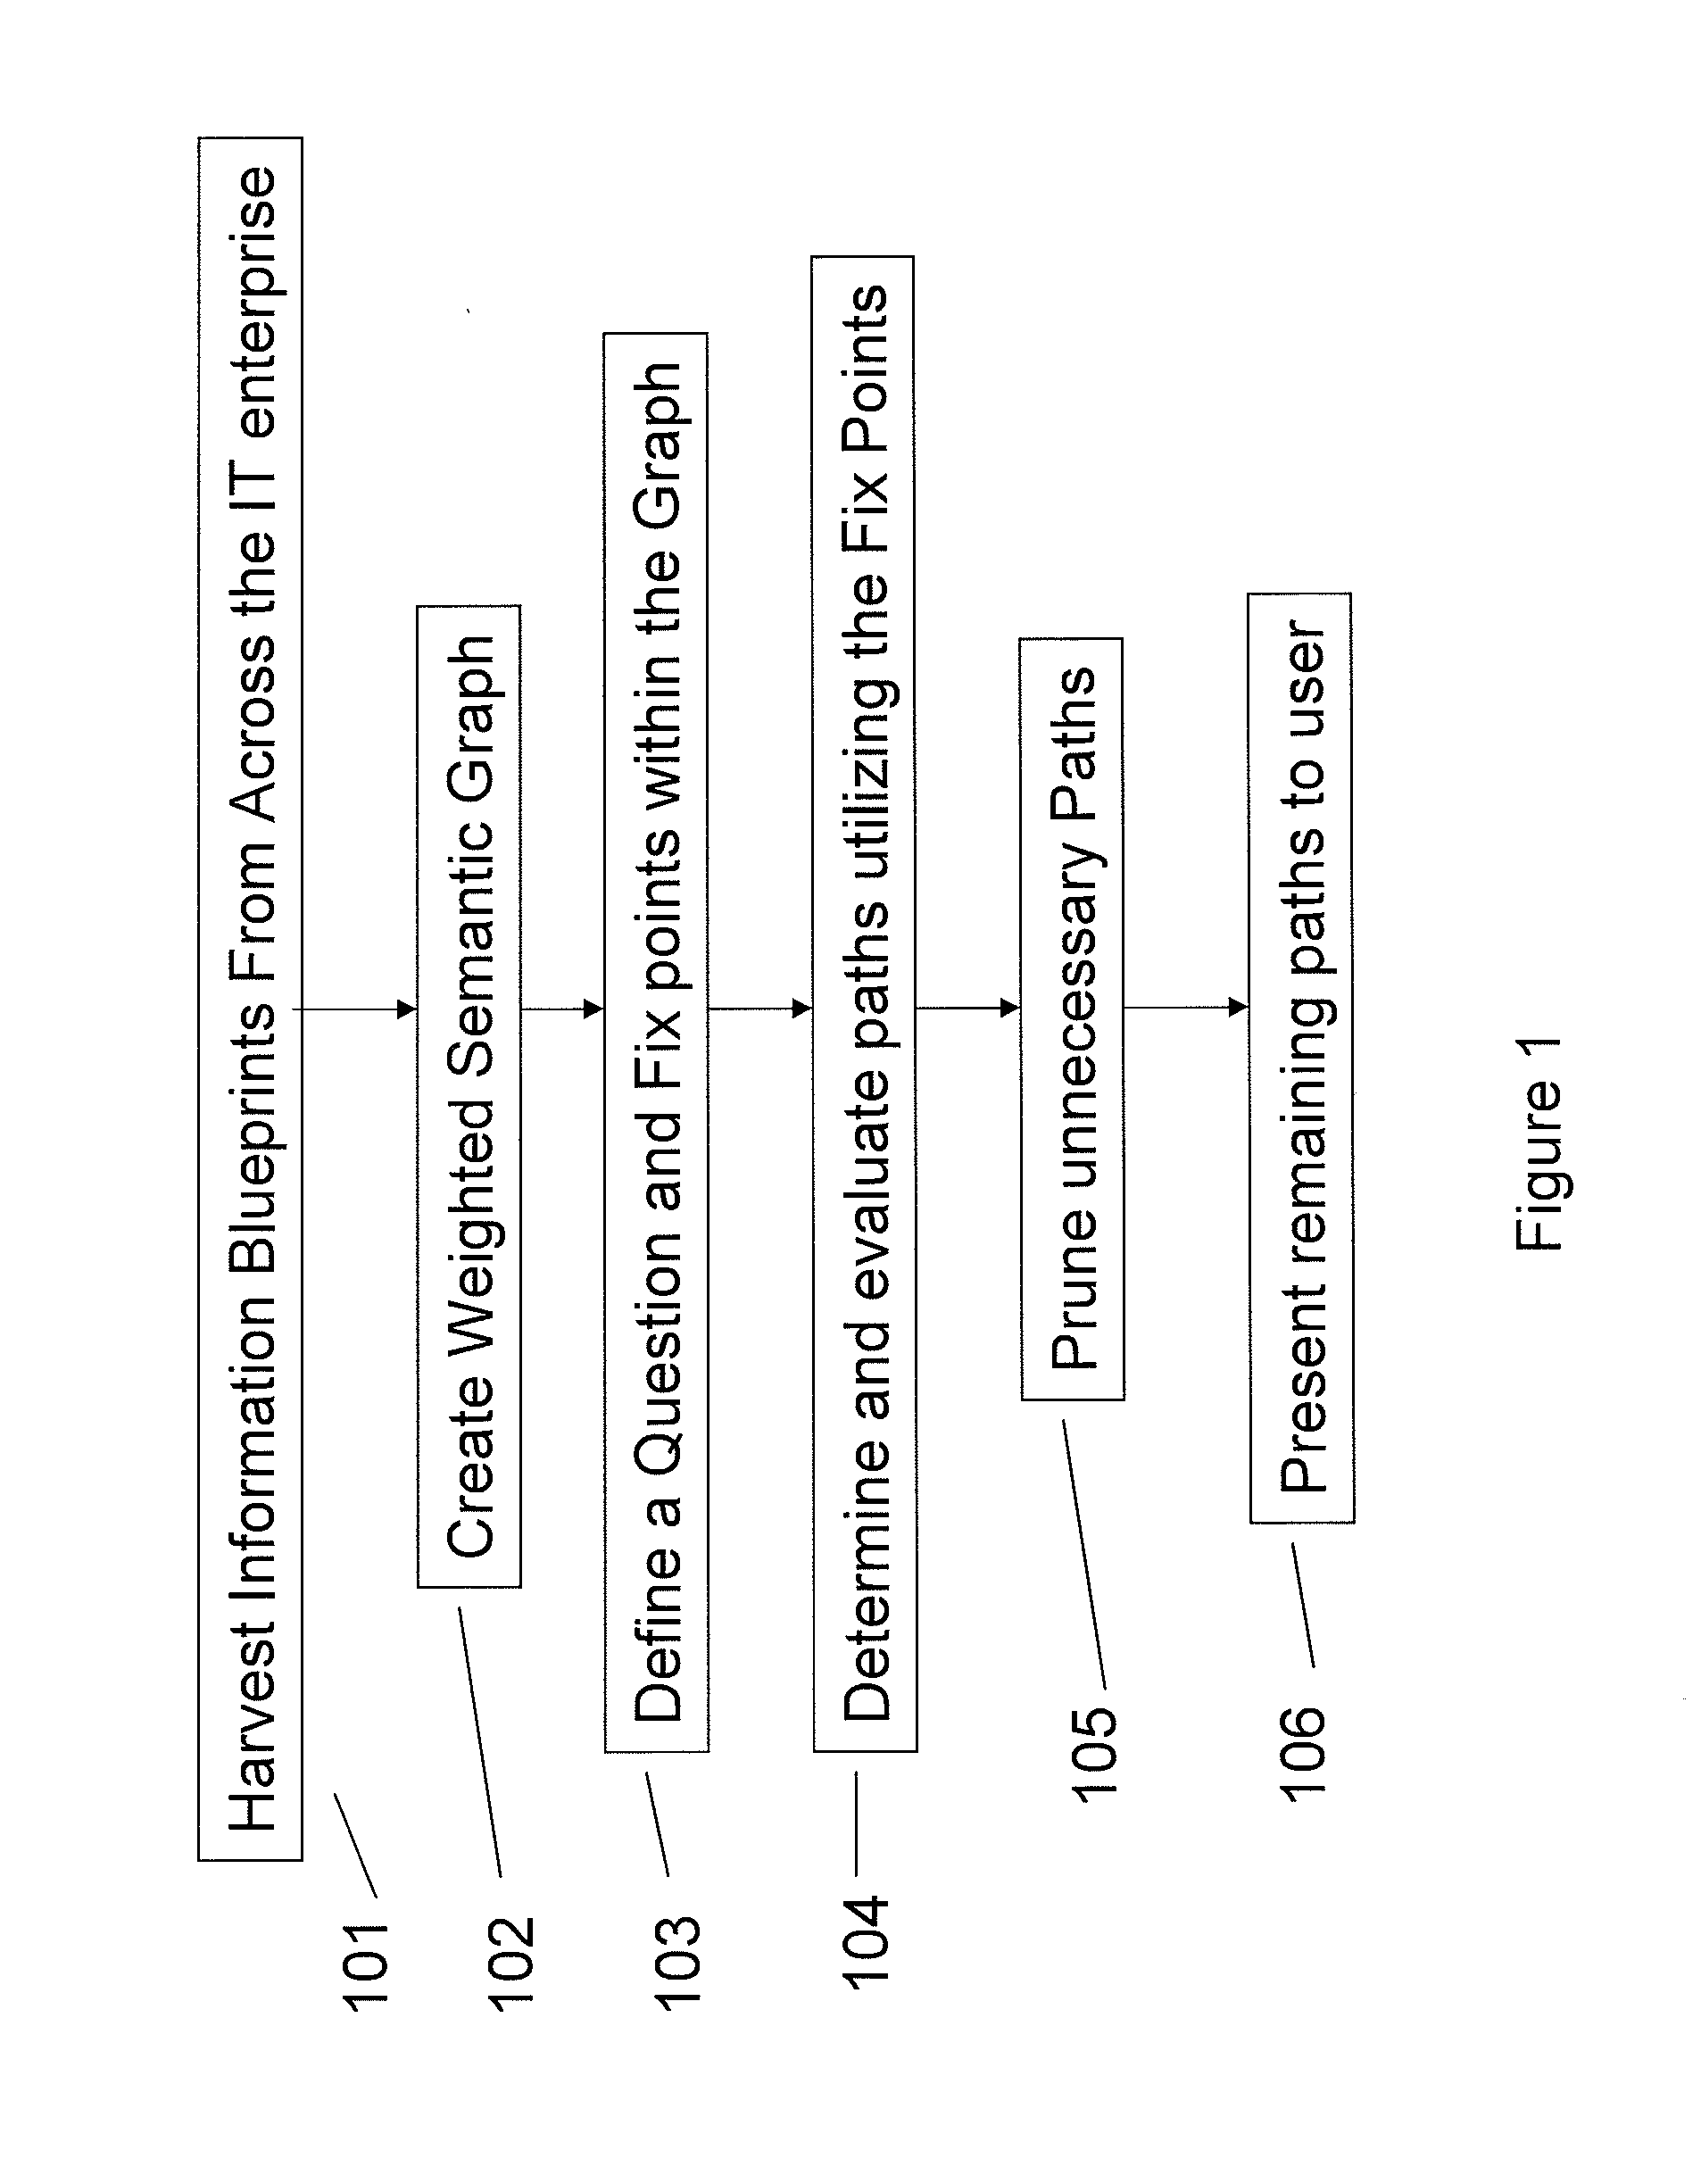 Semantic questioning mechanism to enable analysis of information architectures